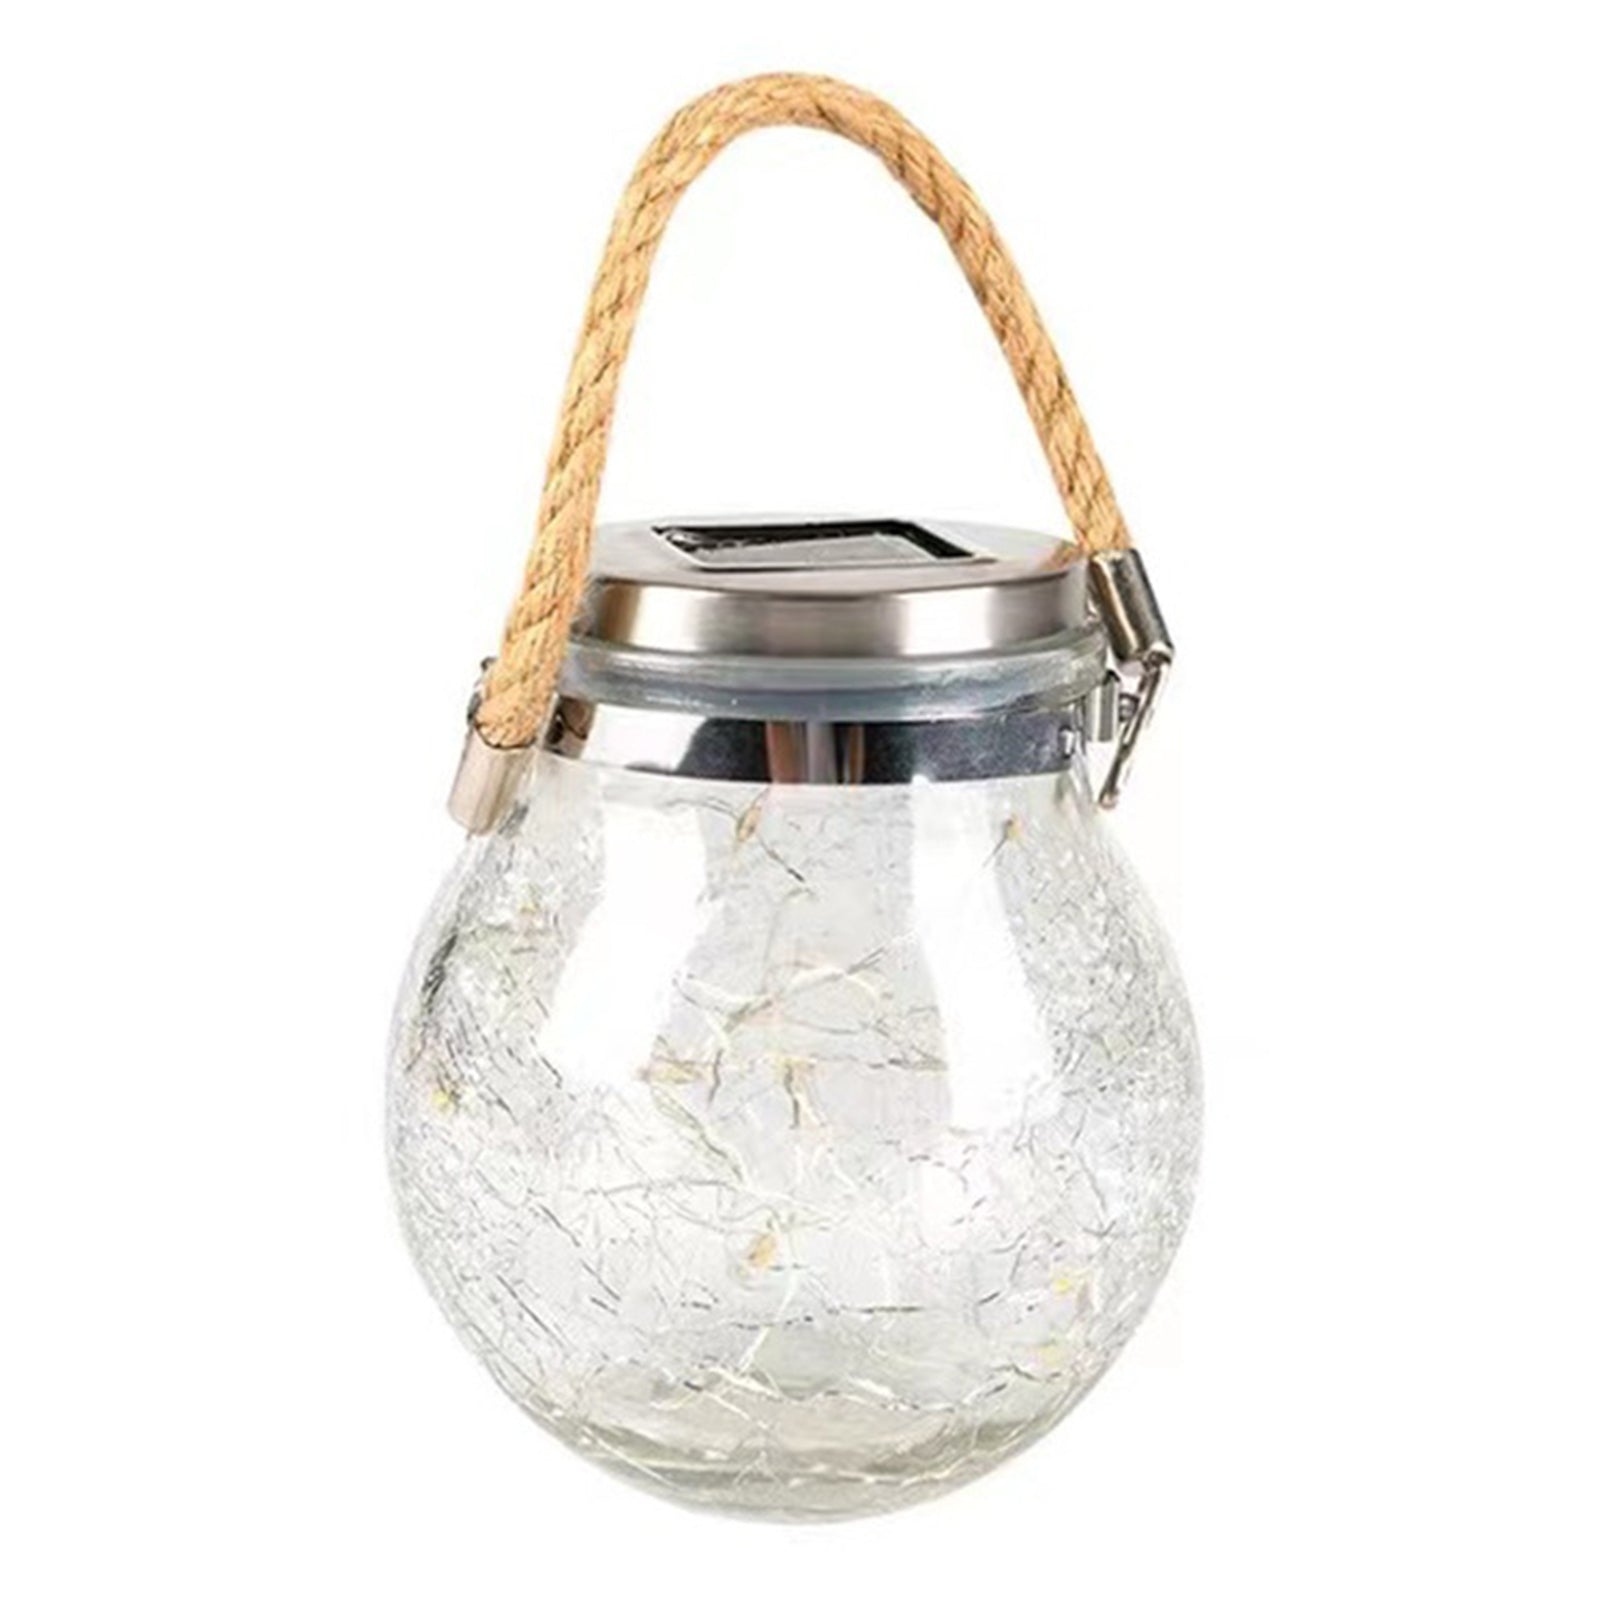 Hanging Solar Lights Outdoor Waterproof Christmas Decoration Cracked Glass Hanging Ball Lights for Garden Yard Patio Lawn